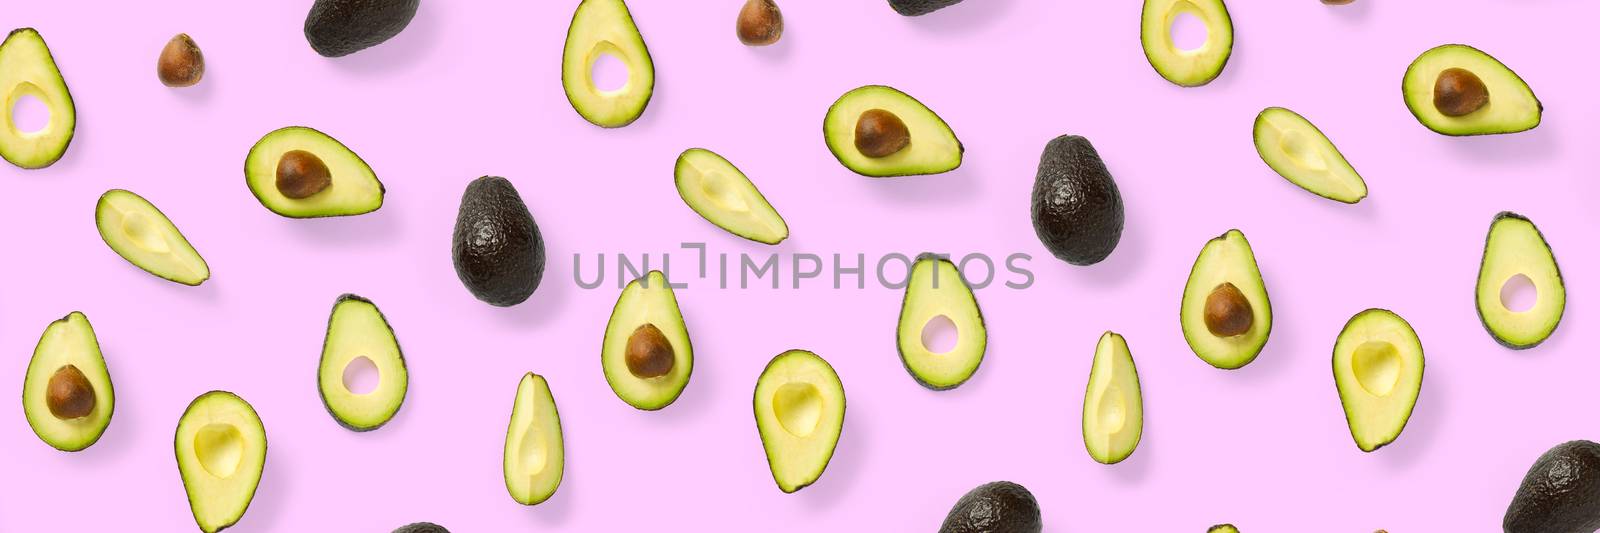 Avocado banner. Background made from isolated Avocado pieces on pink background. Flat lay of fresh ripe avocados and avacado pieces